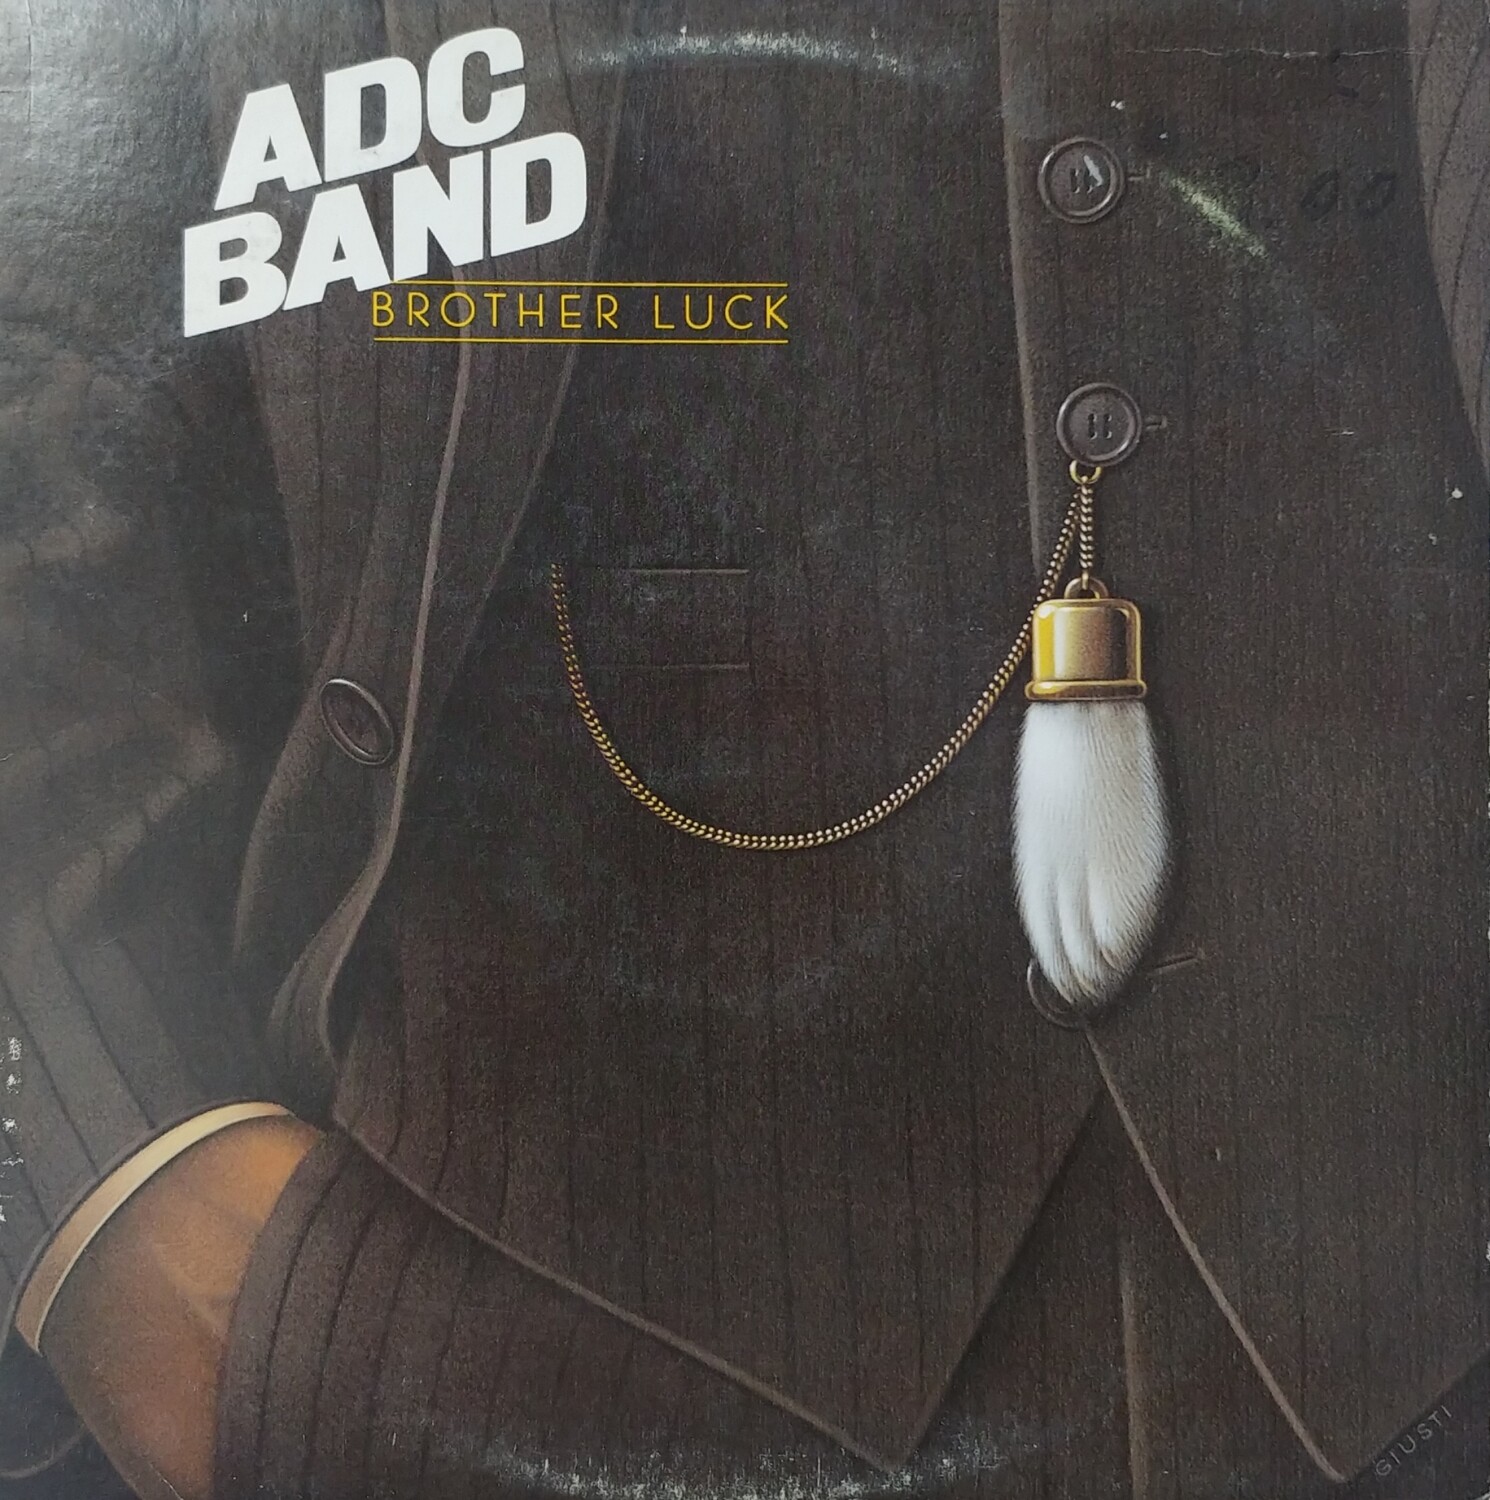 ADC Band - Brother Luck